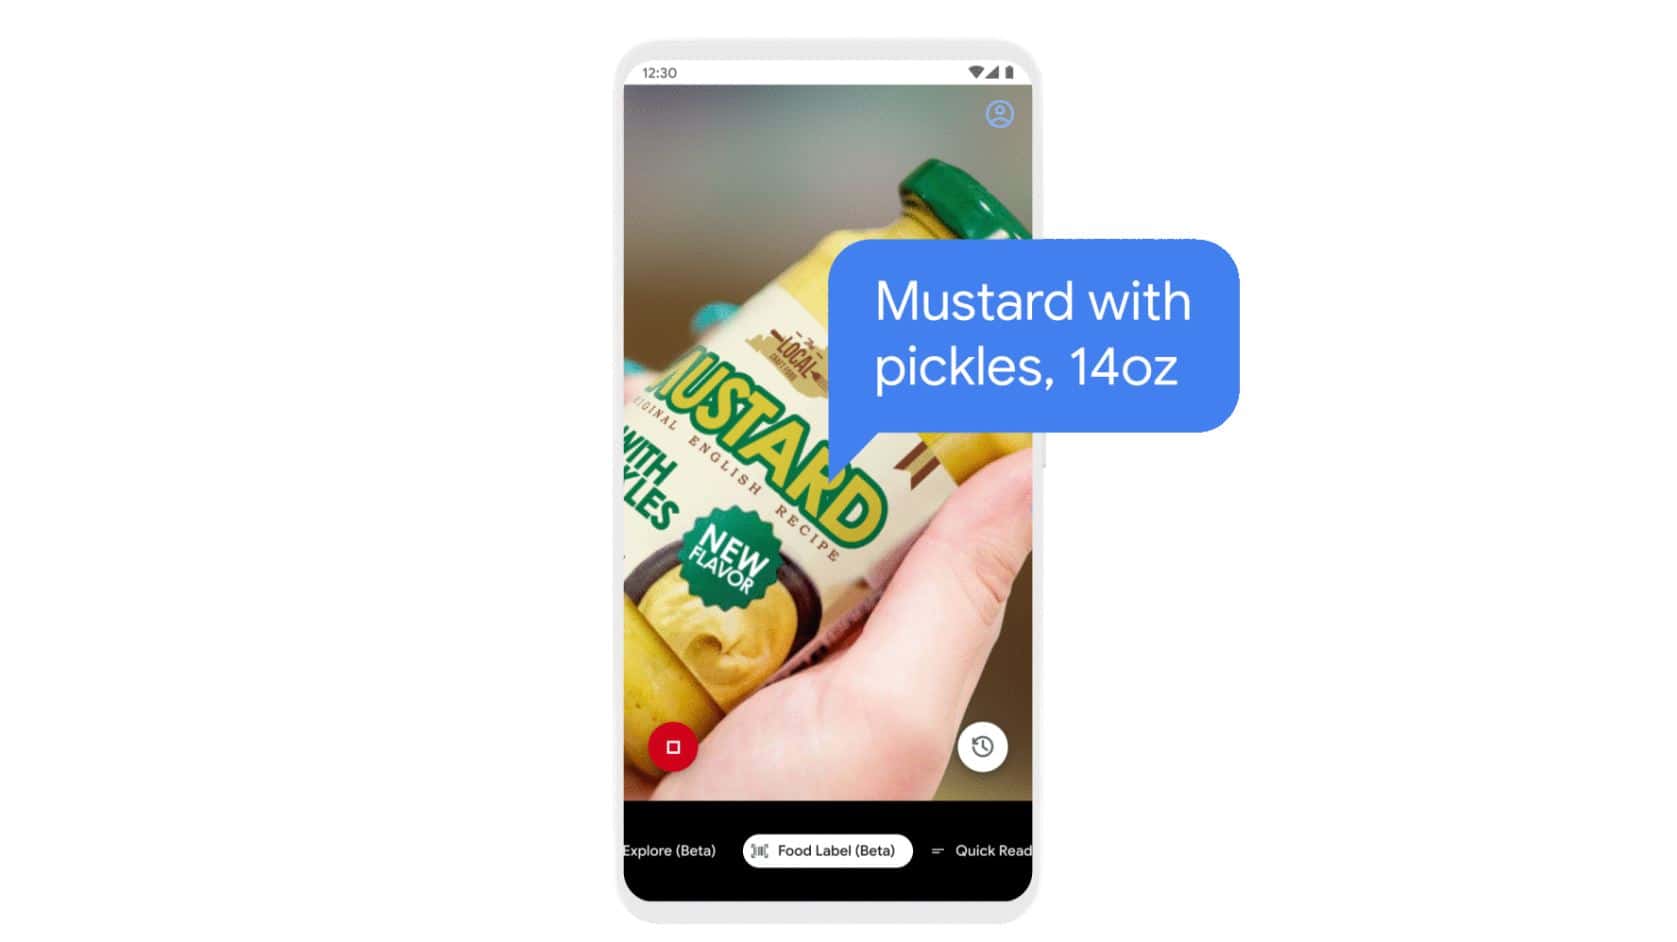 Google Lookout app can now quickly identify packaged foods